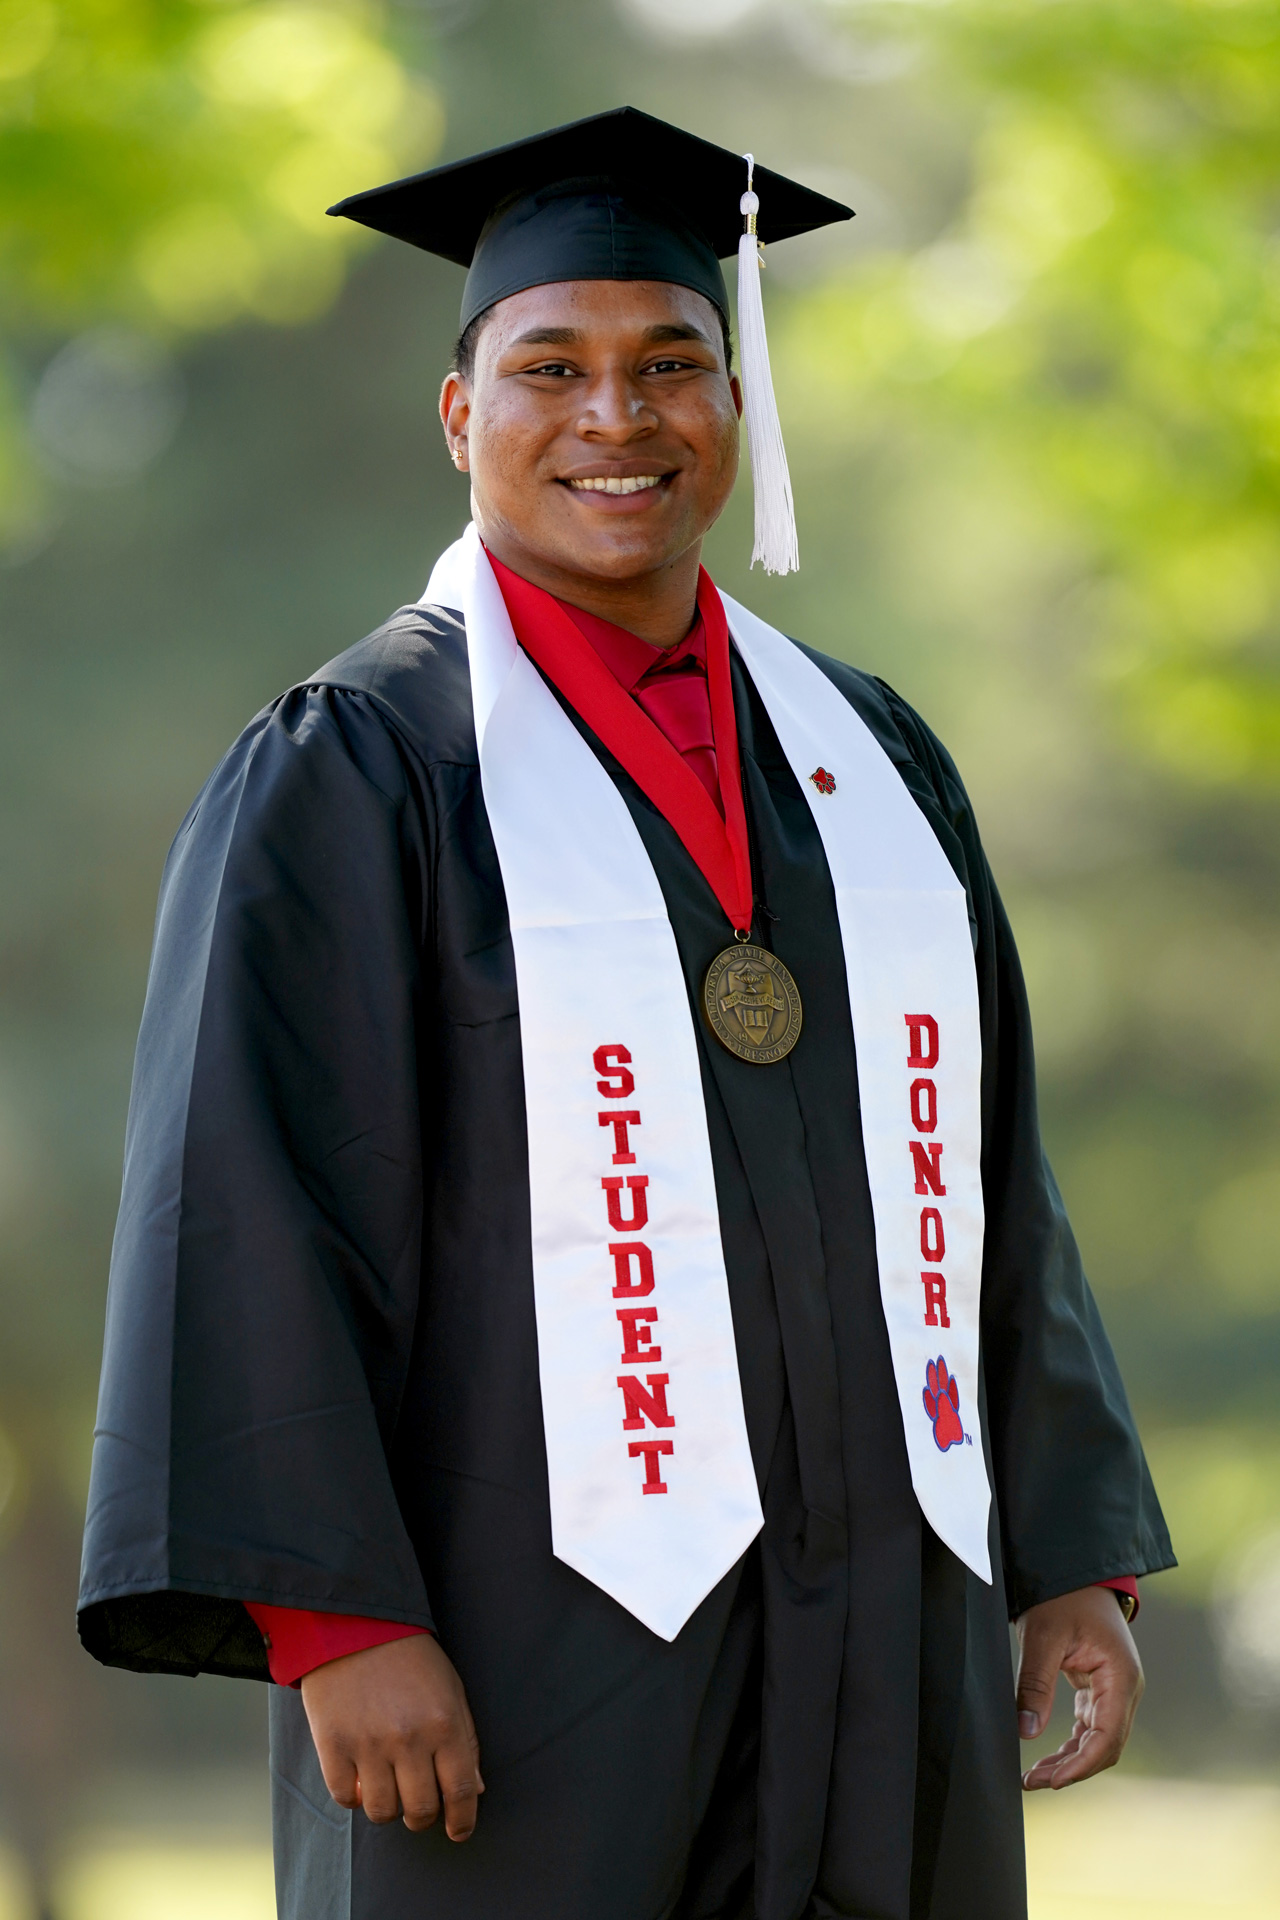 Undergraduate Dean's Medalist Caleb Charles stands with his graduation regalia and his student donor stole.